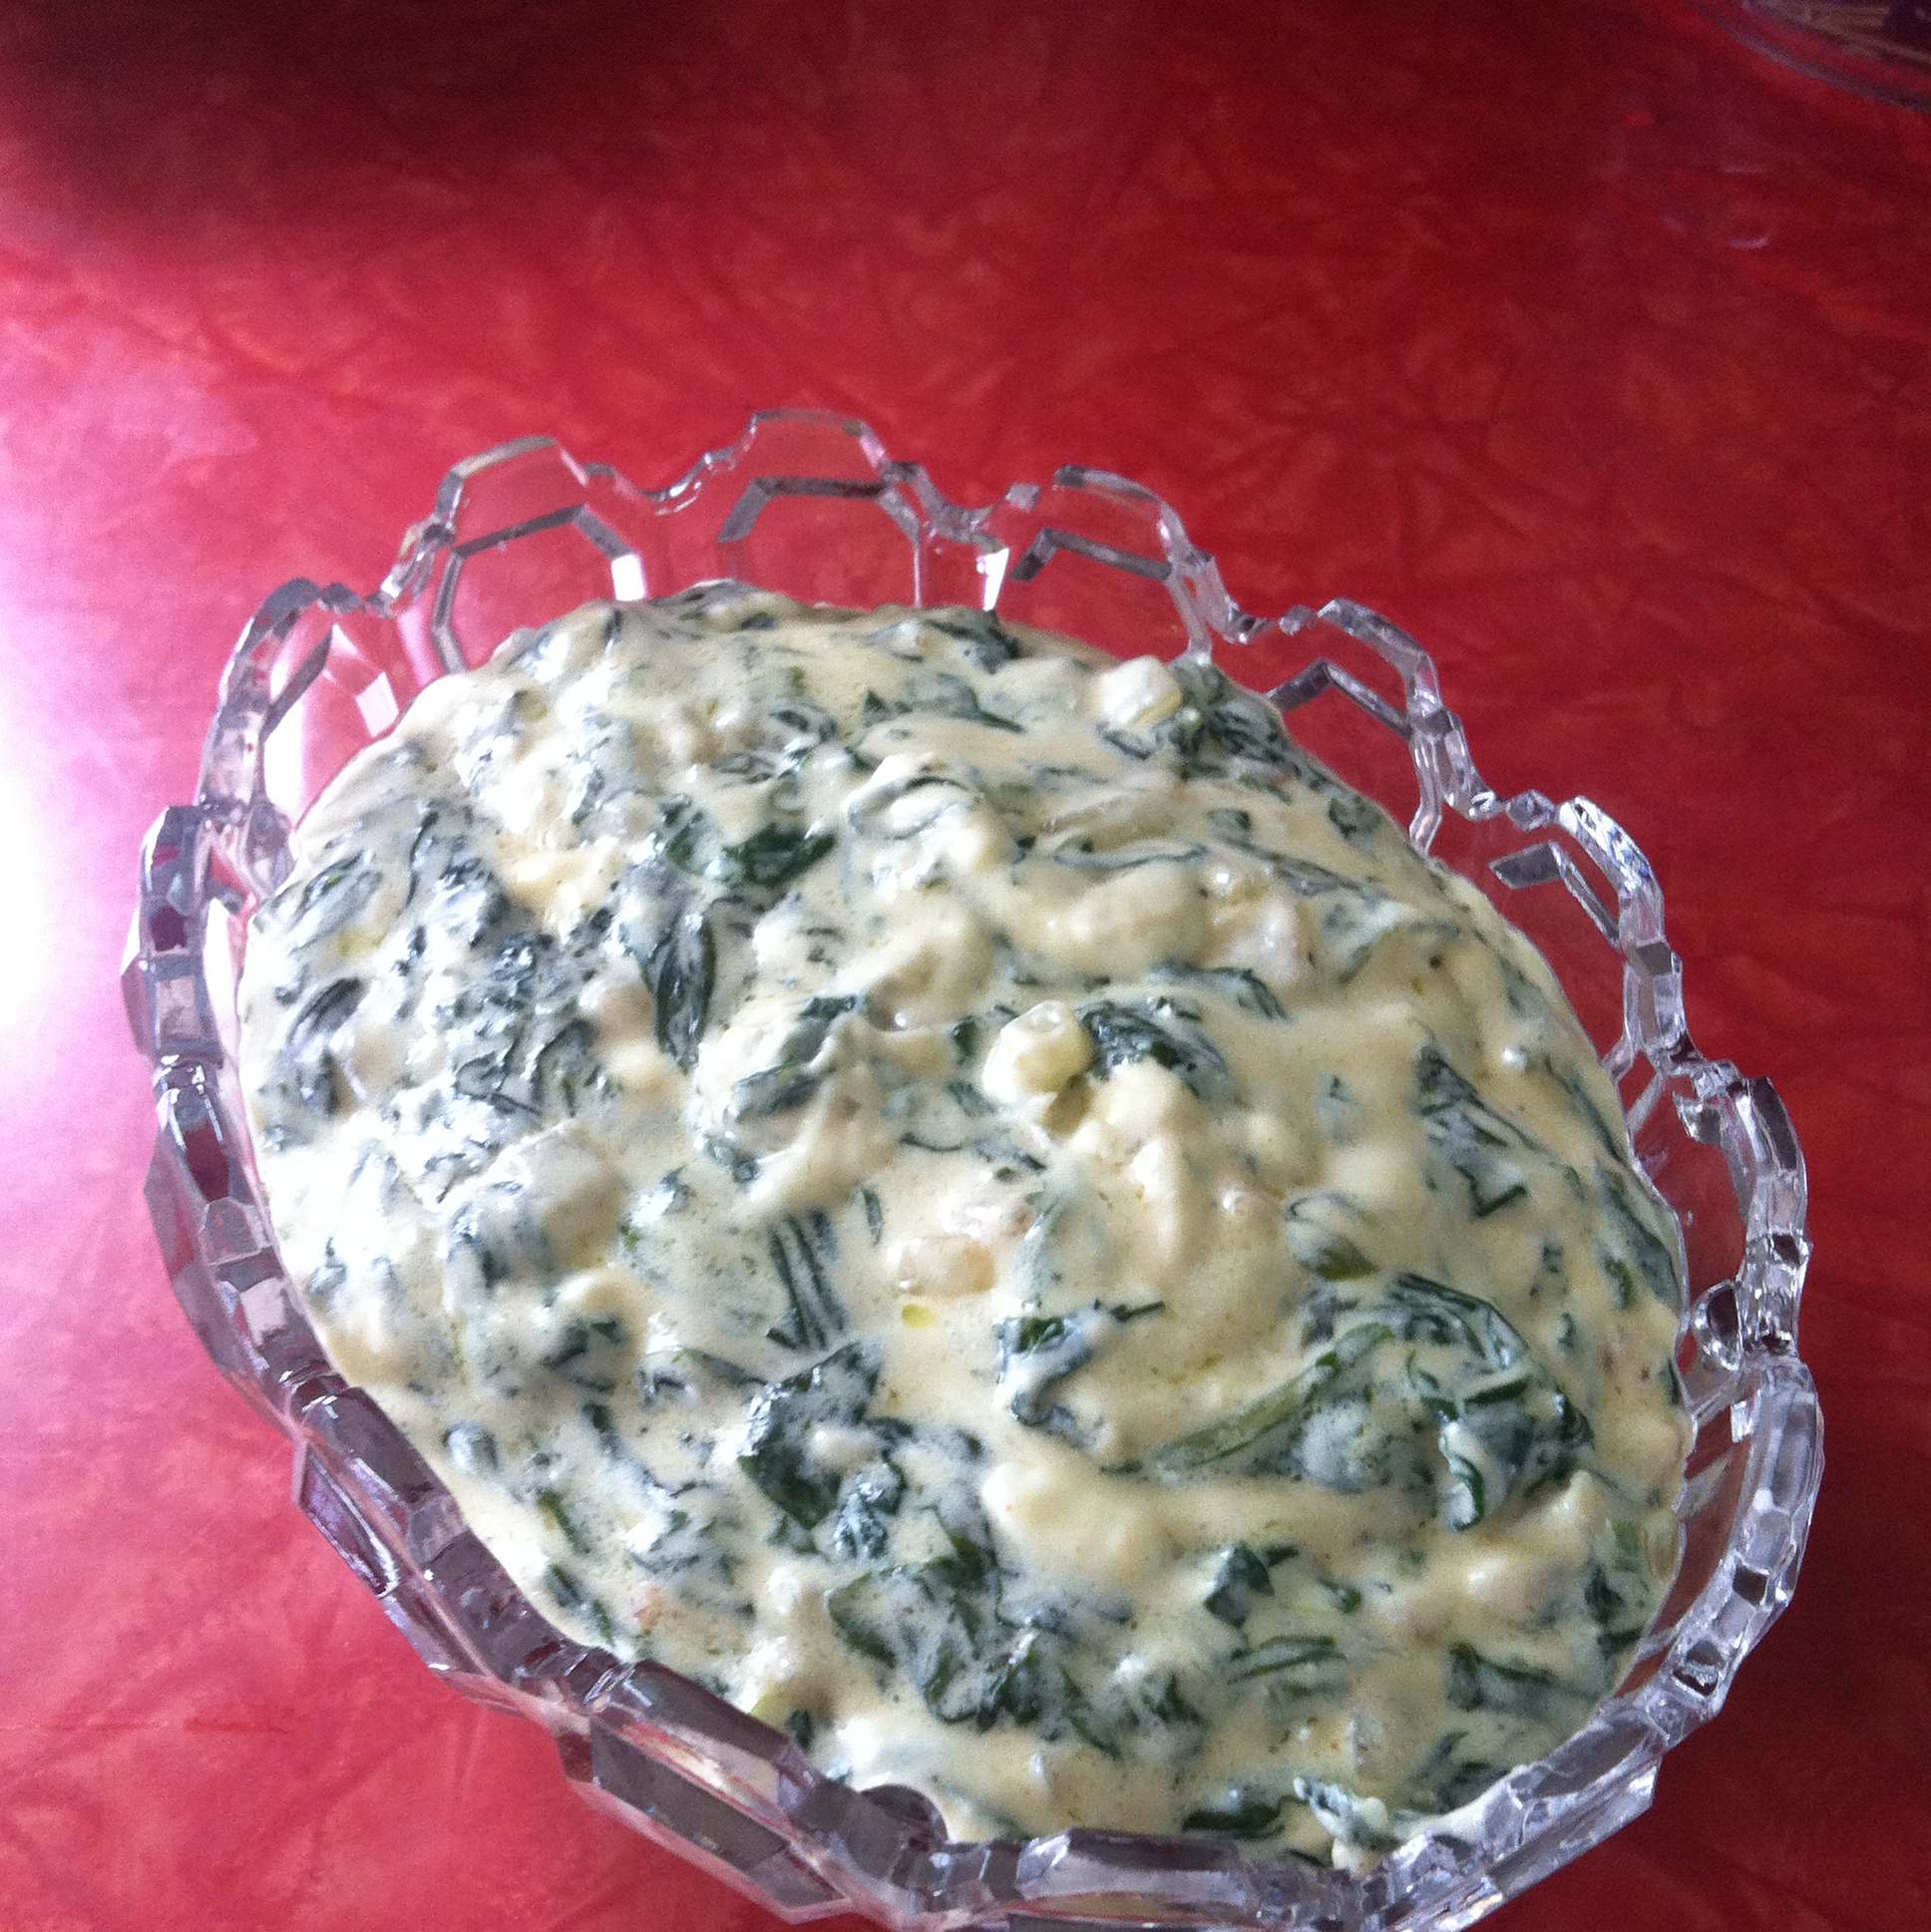 Spinach Dip II